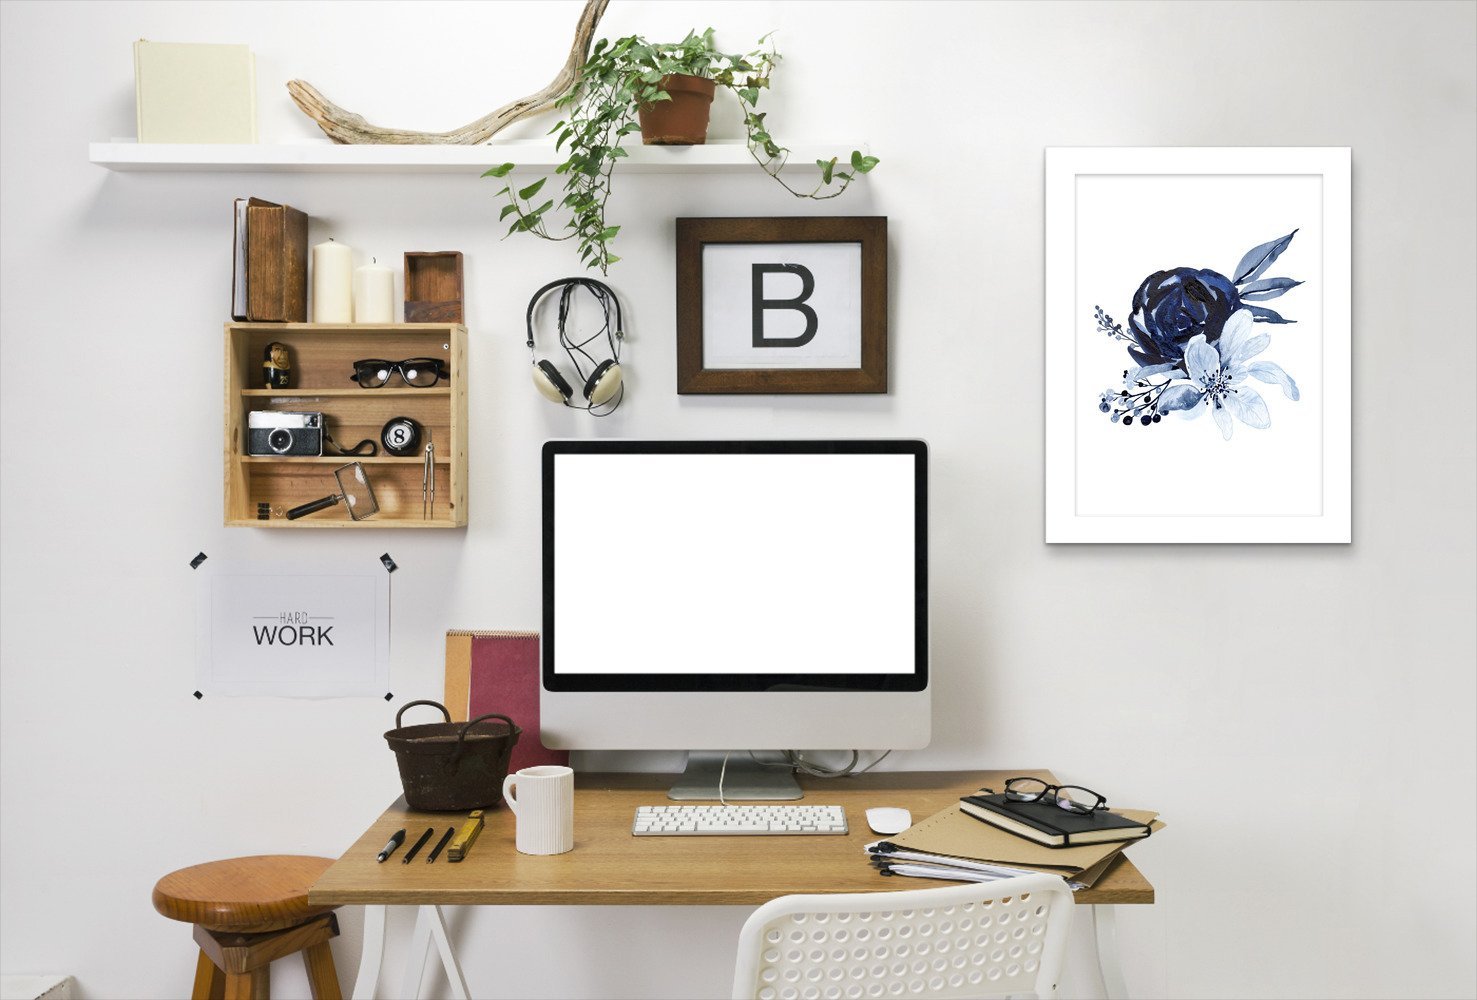 Blue Floral 2 By Wall + Wonder - Framed Print - Americanflat